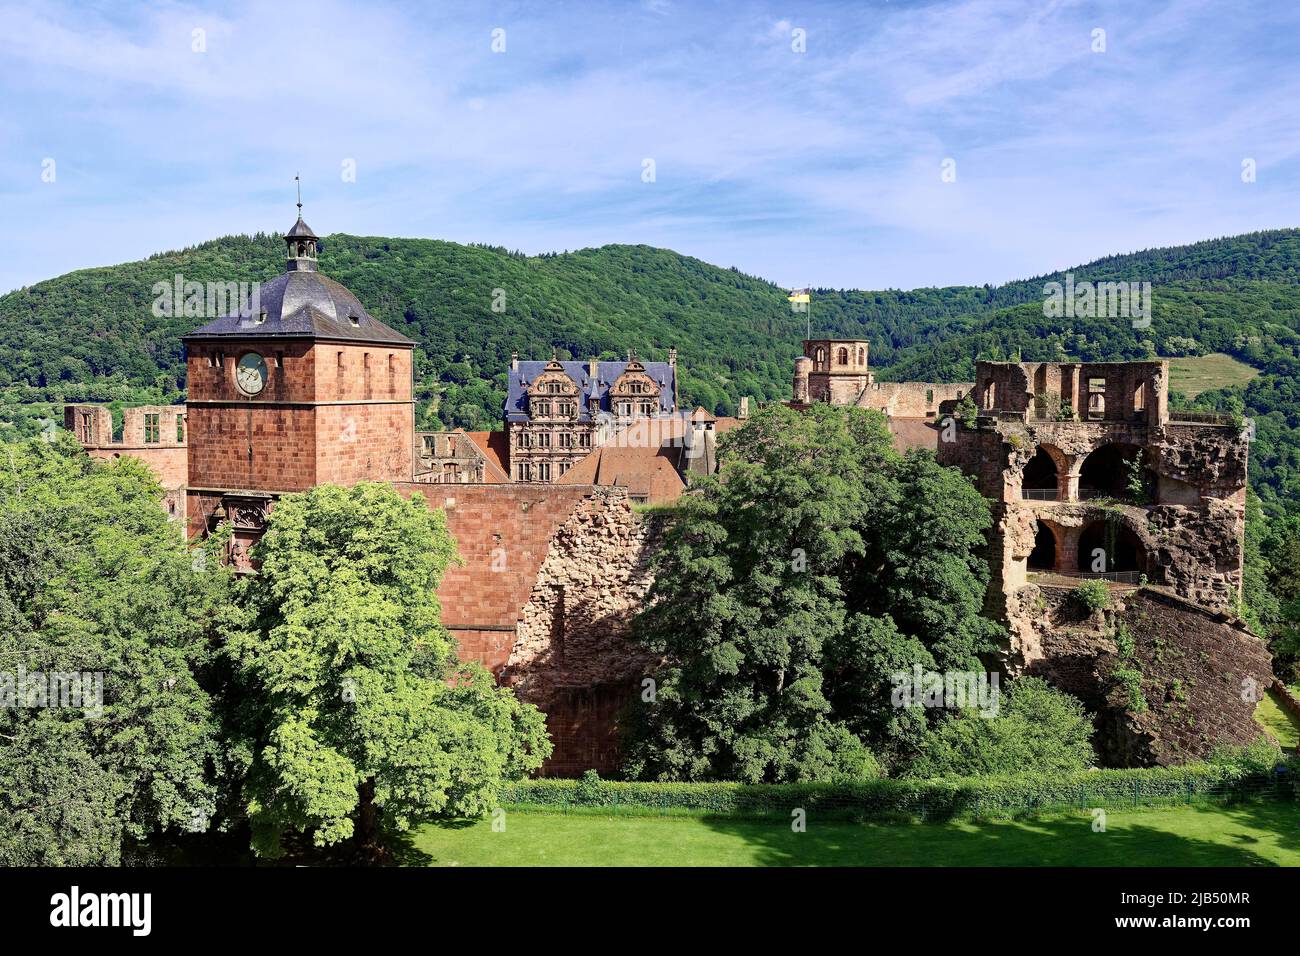 Heidelberg Castle, first mentioned in 1225, red sandstone from the Neckar valley, south view from the Schloss-Wolfsbrunnenweg, gate tower on the Stock Photo